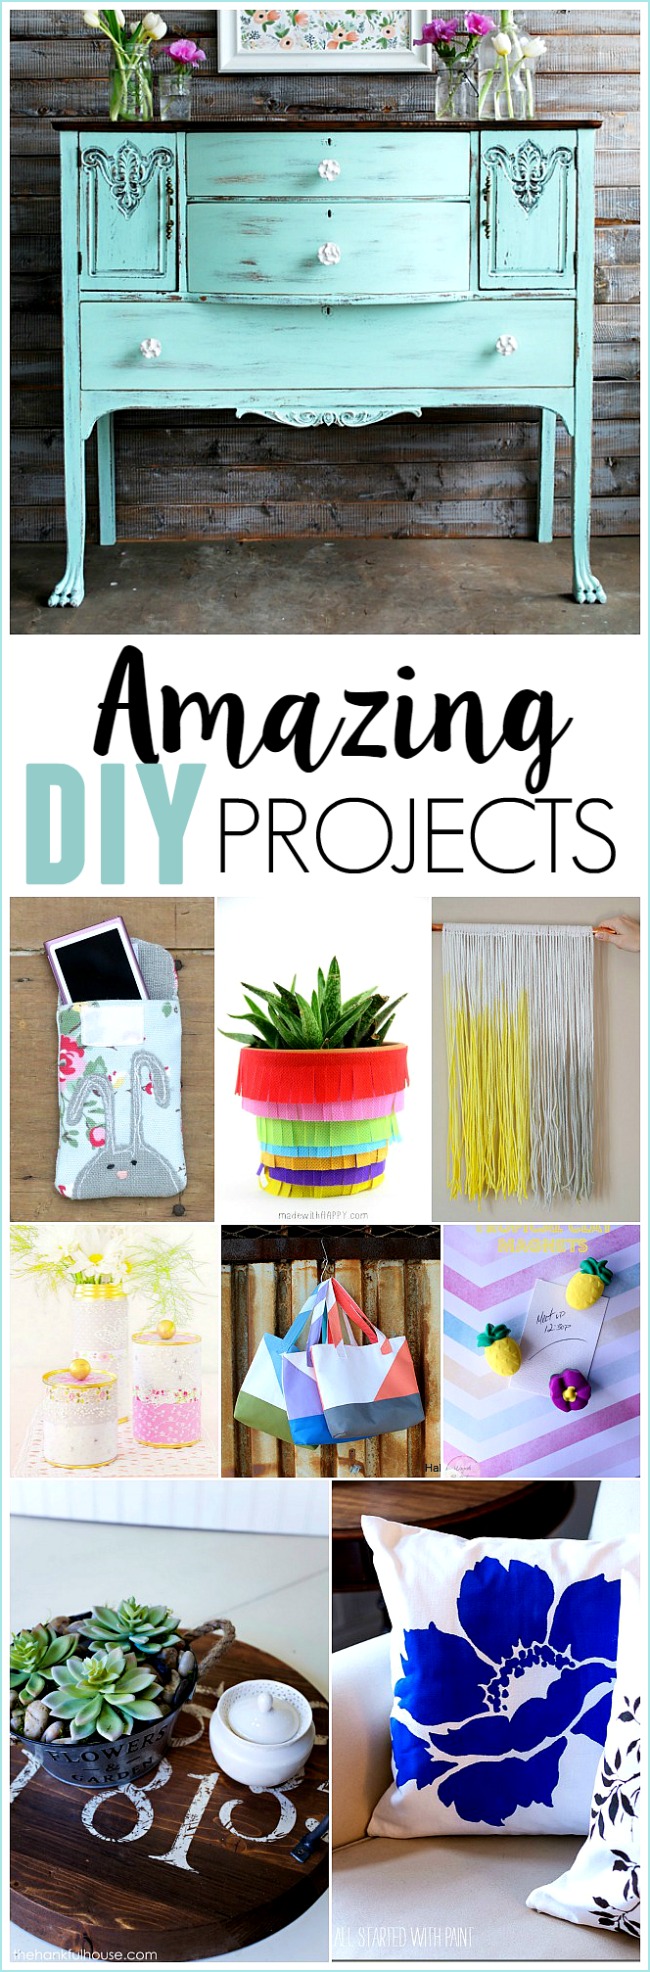 Amazing DIY projects